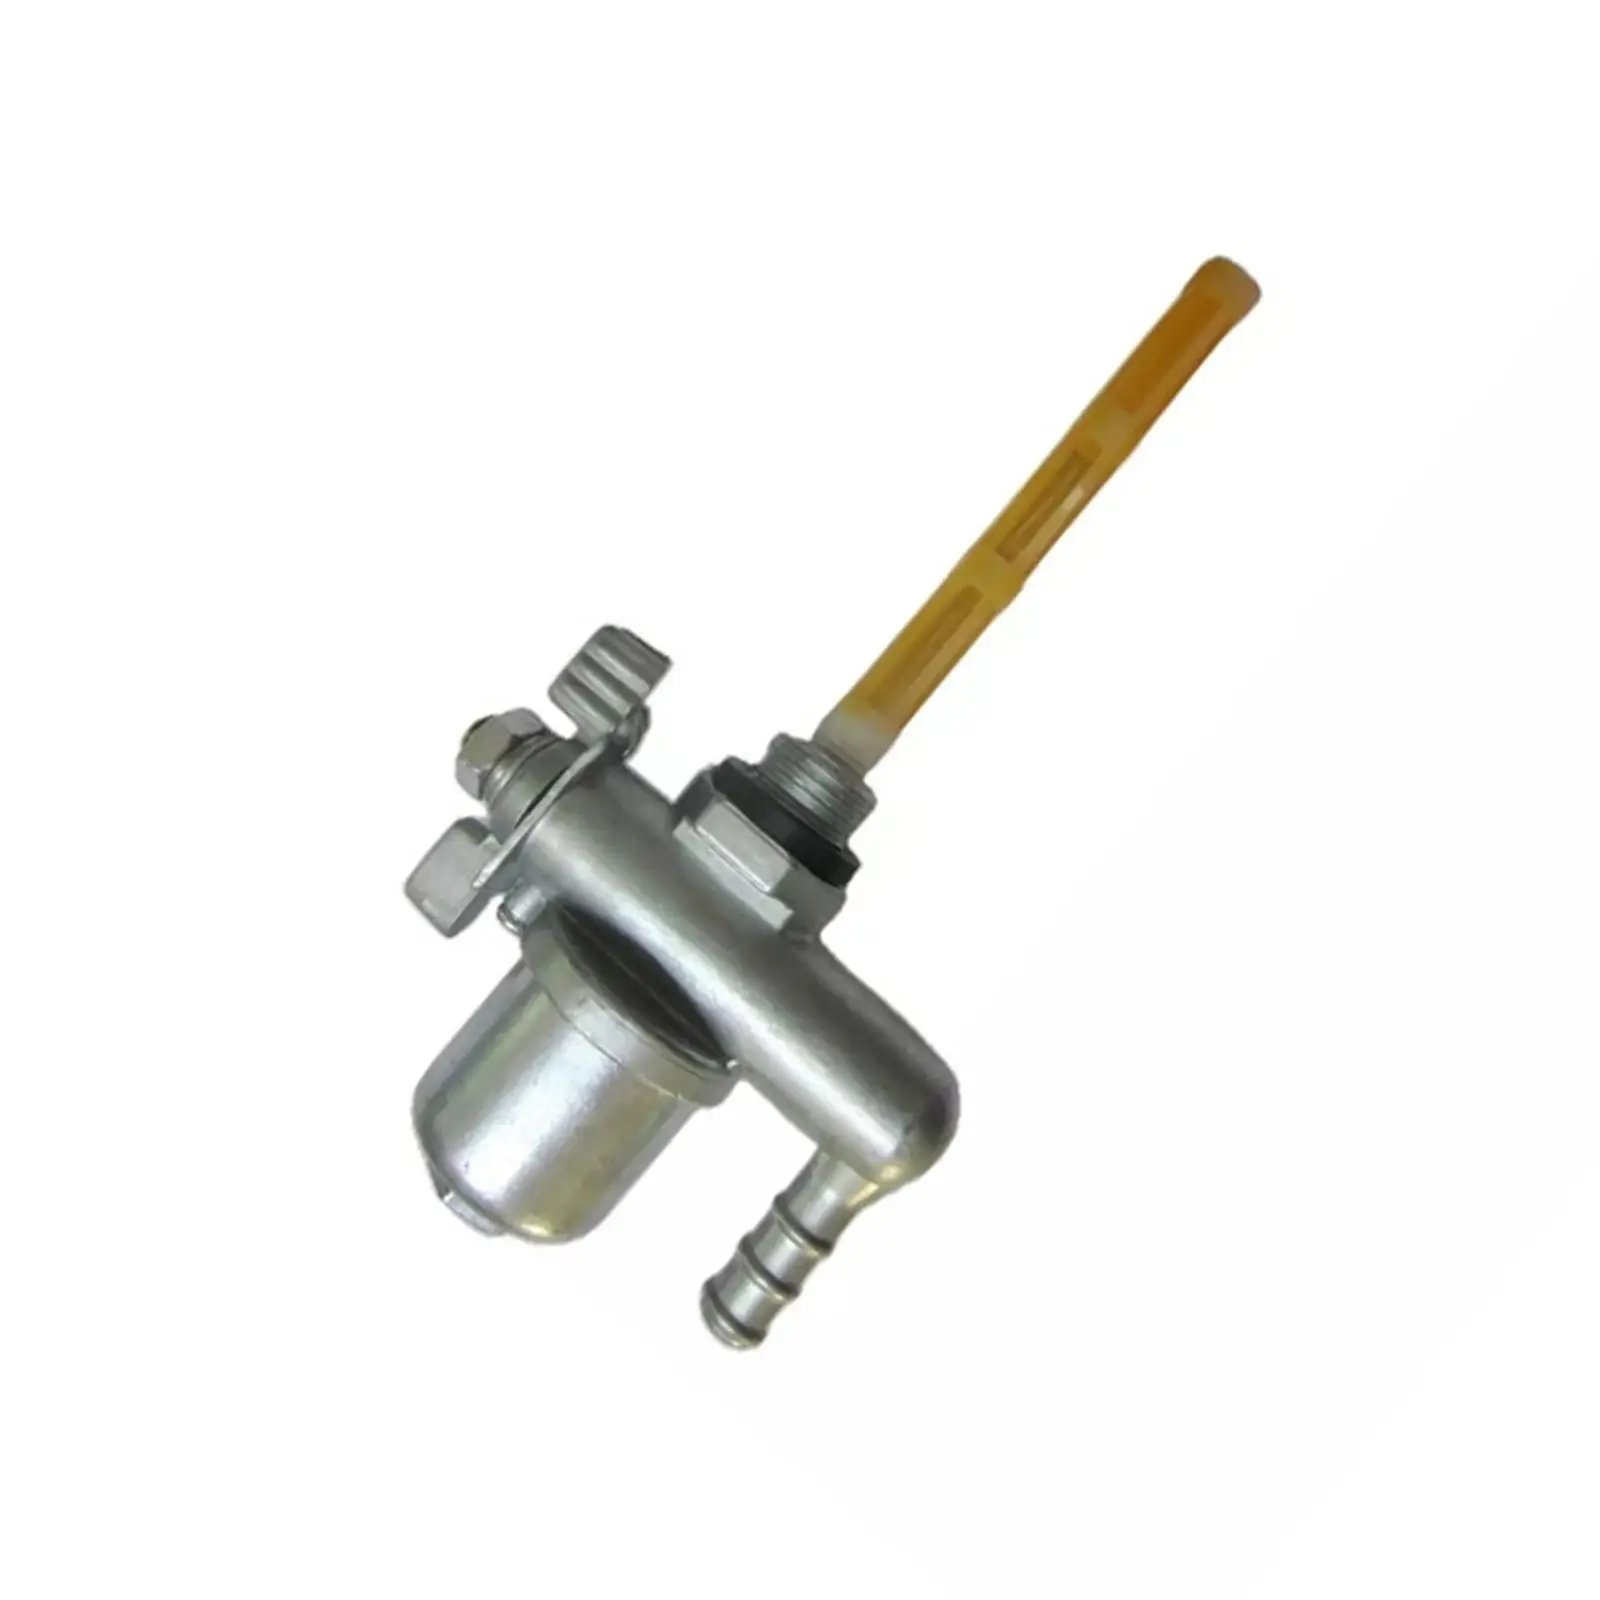 Motorcycle fuel Switch Pump Valve Petcock Replacement Fits for Ruassia Msk Motorbikes Supplies Durable Motorbike Accessories